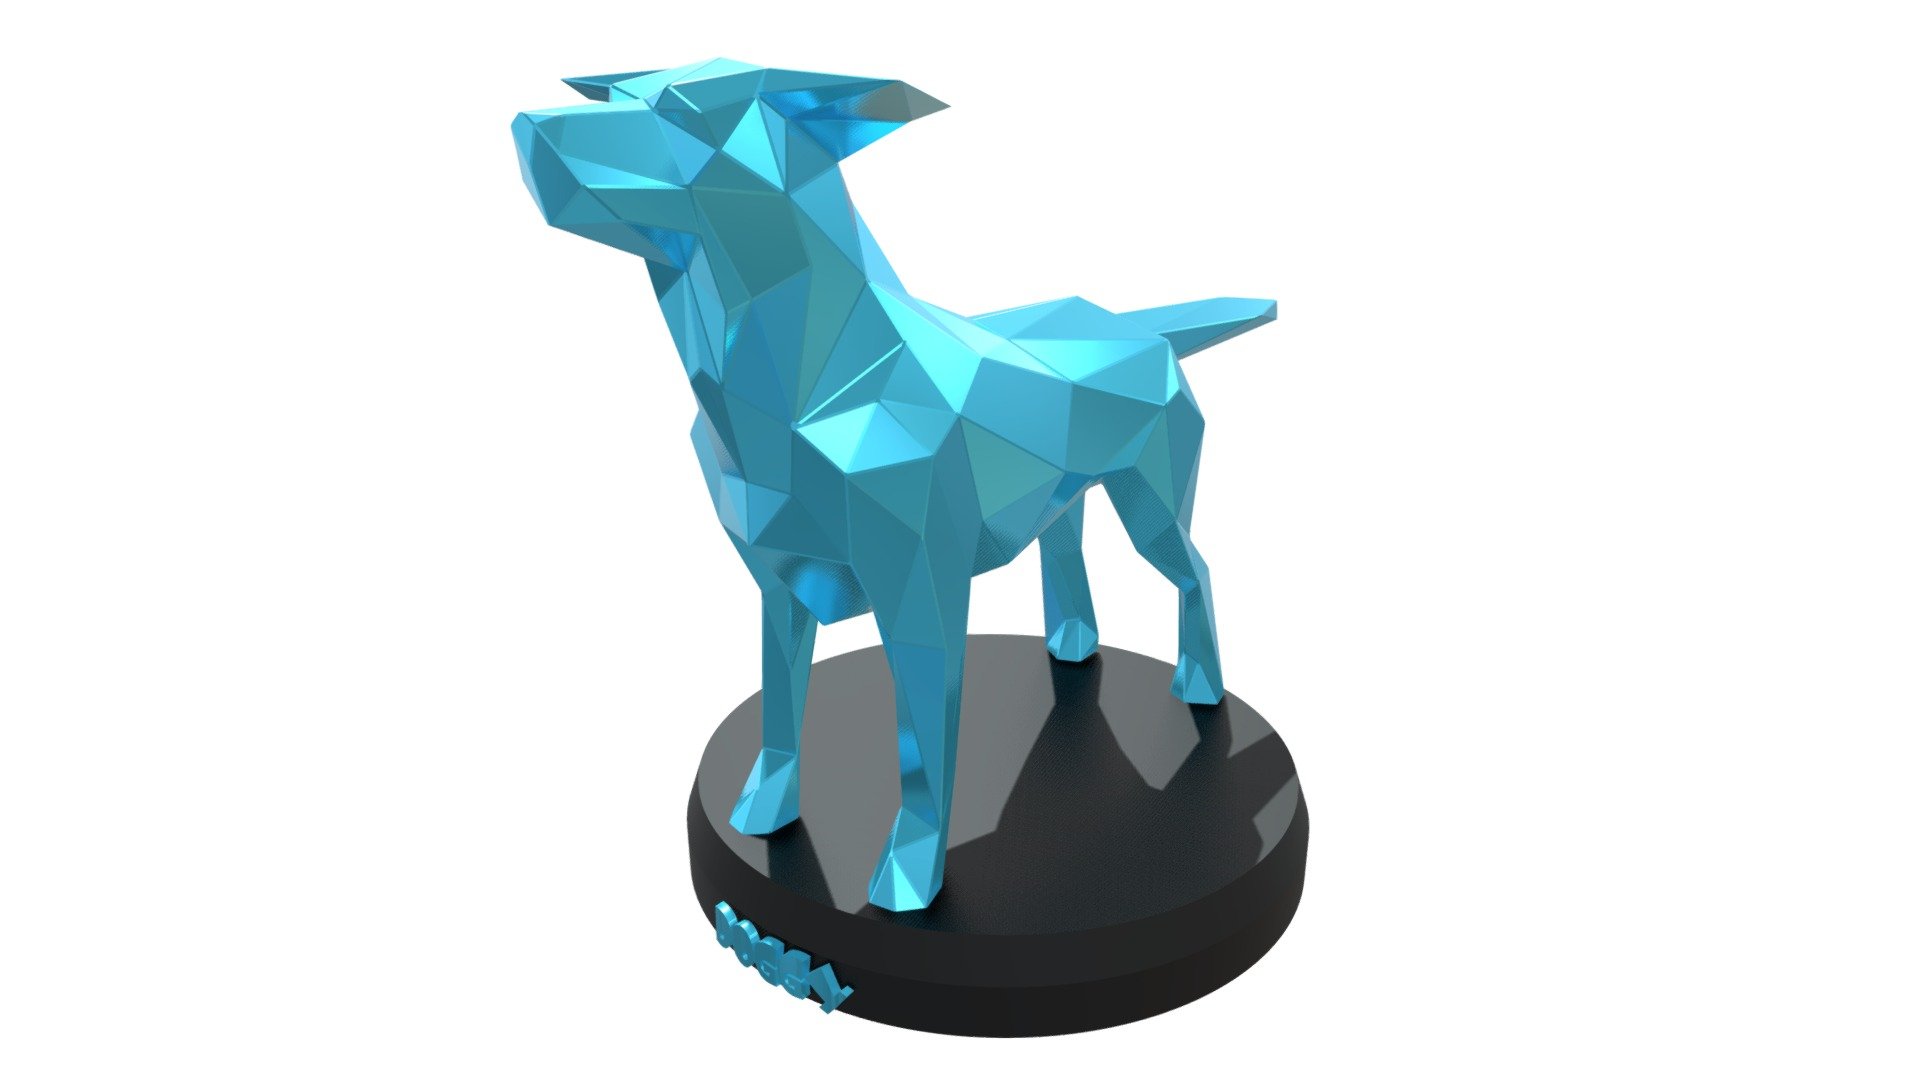 Polygonal 3D Model with Parametric modeling with gold material, make it recommend for :




Basic modeling 

Rigging 

sculpting 

Become Statue

Decorate

3D Print File

Toy

Have fun  :) - Poly Doggy - Buy Royalty Free 3D model by Puppy3D 3d model